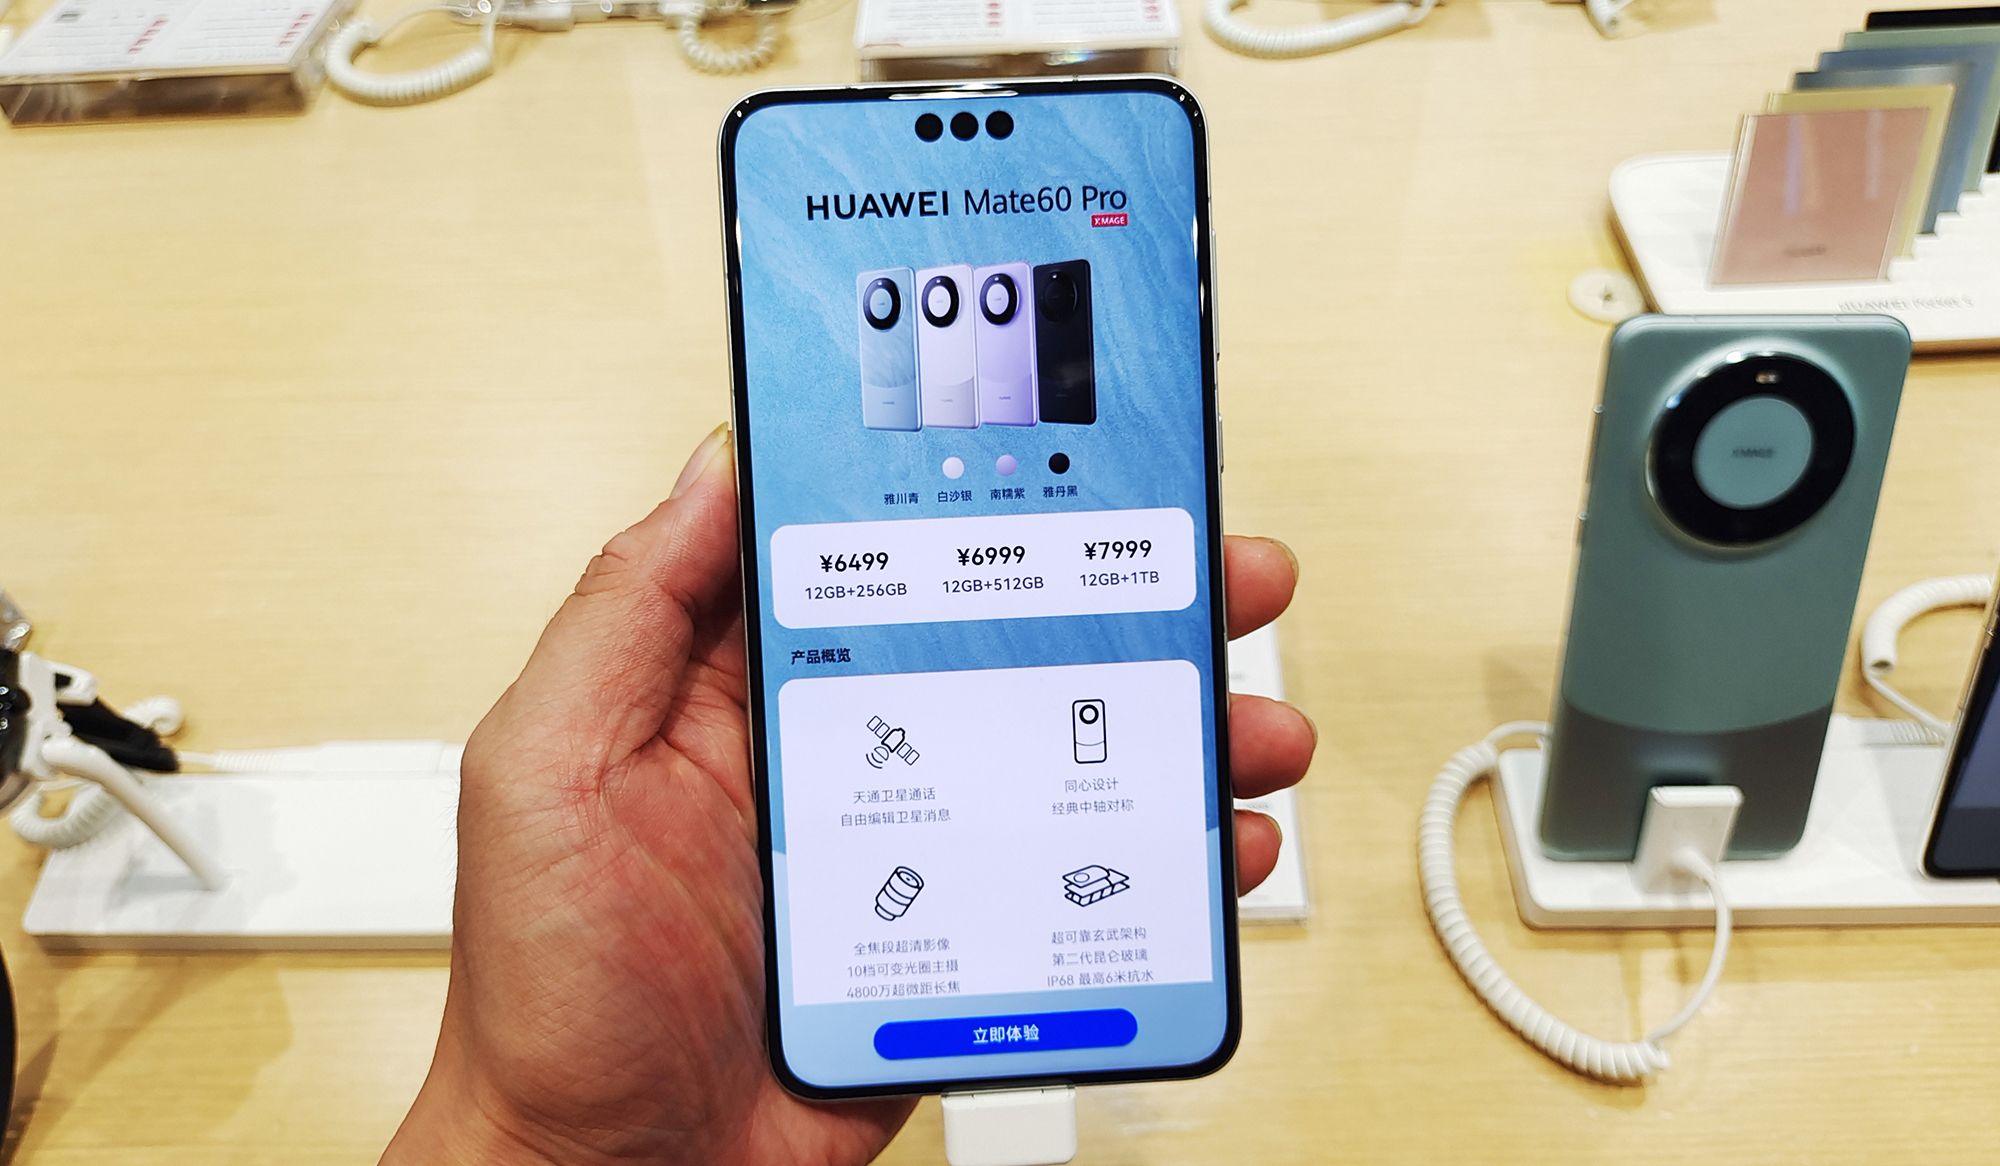 Huawei's smartphone struggles are hitting it hard in China